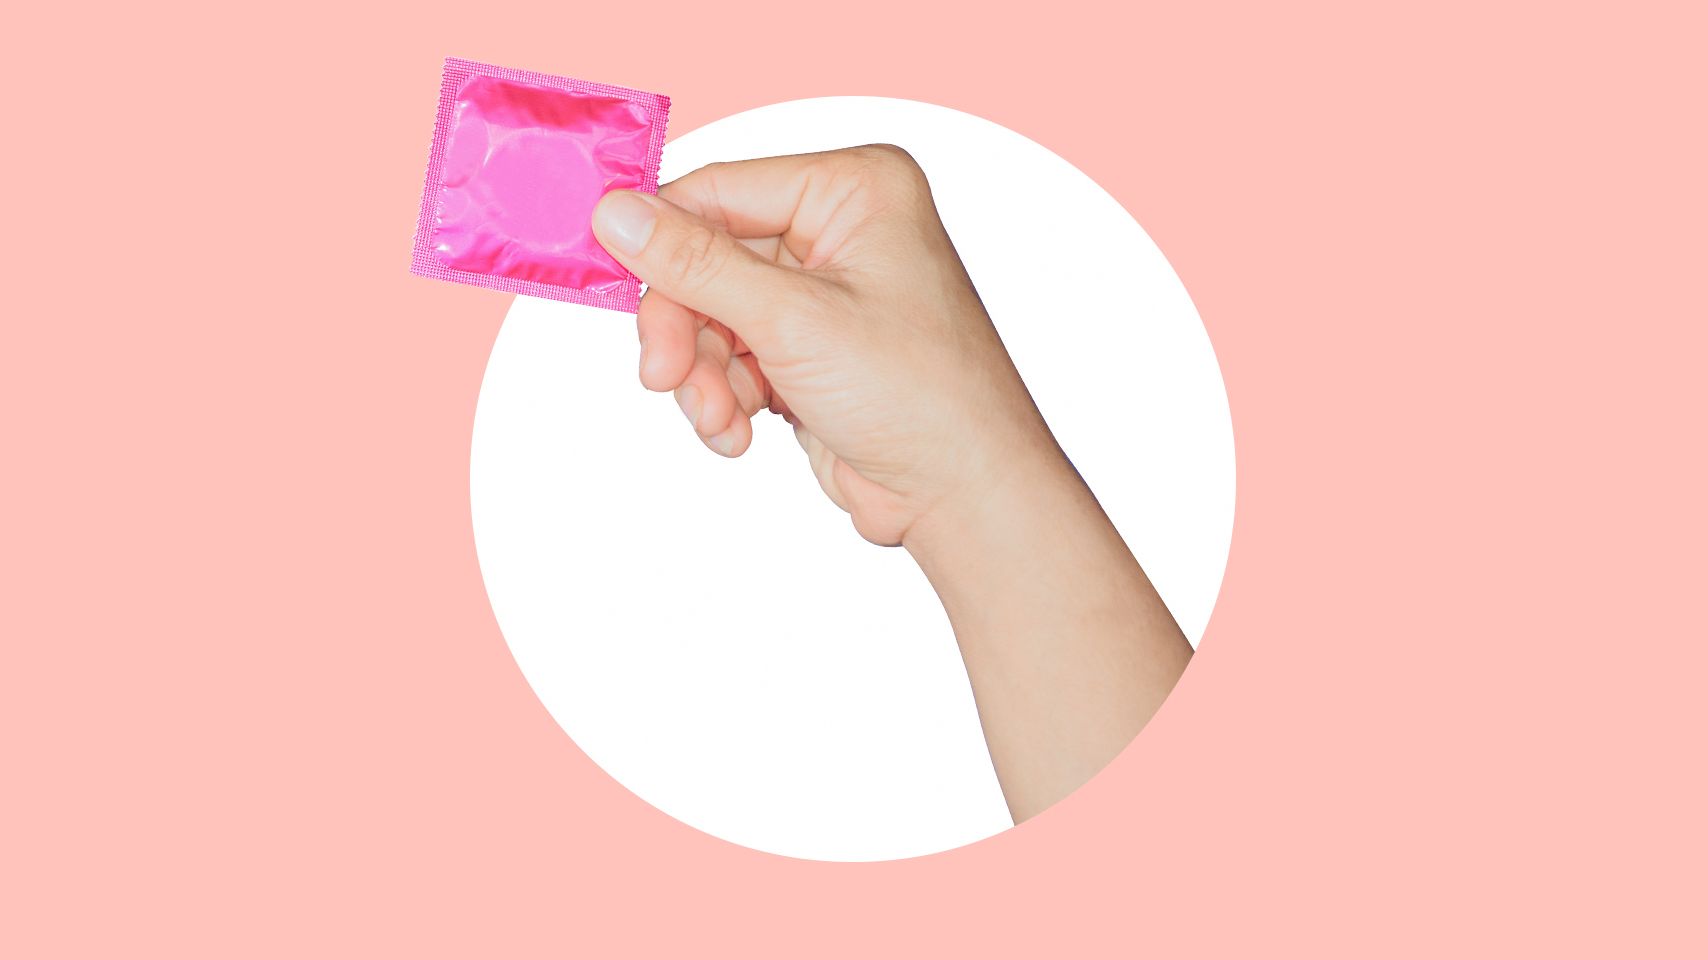 Why Do Condoms Break During Sex? - What to Do If a Condom Breaks